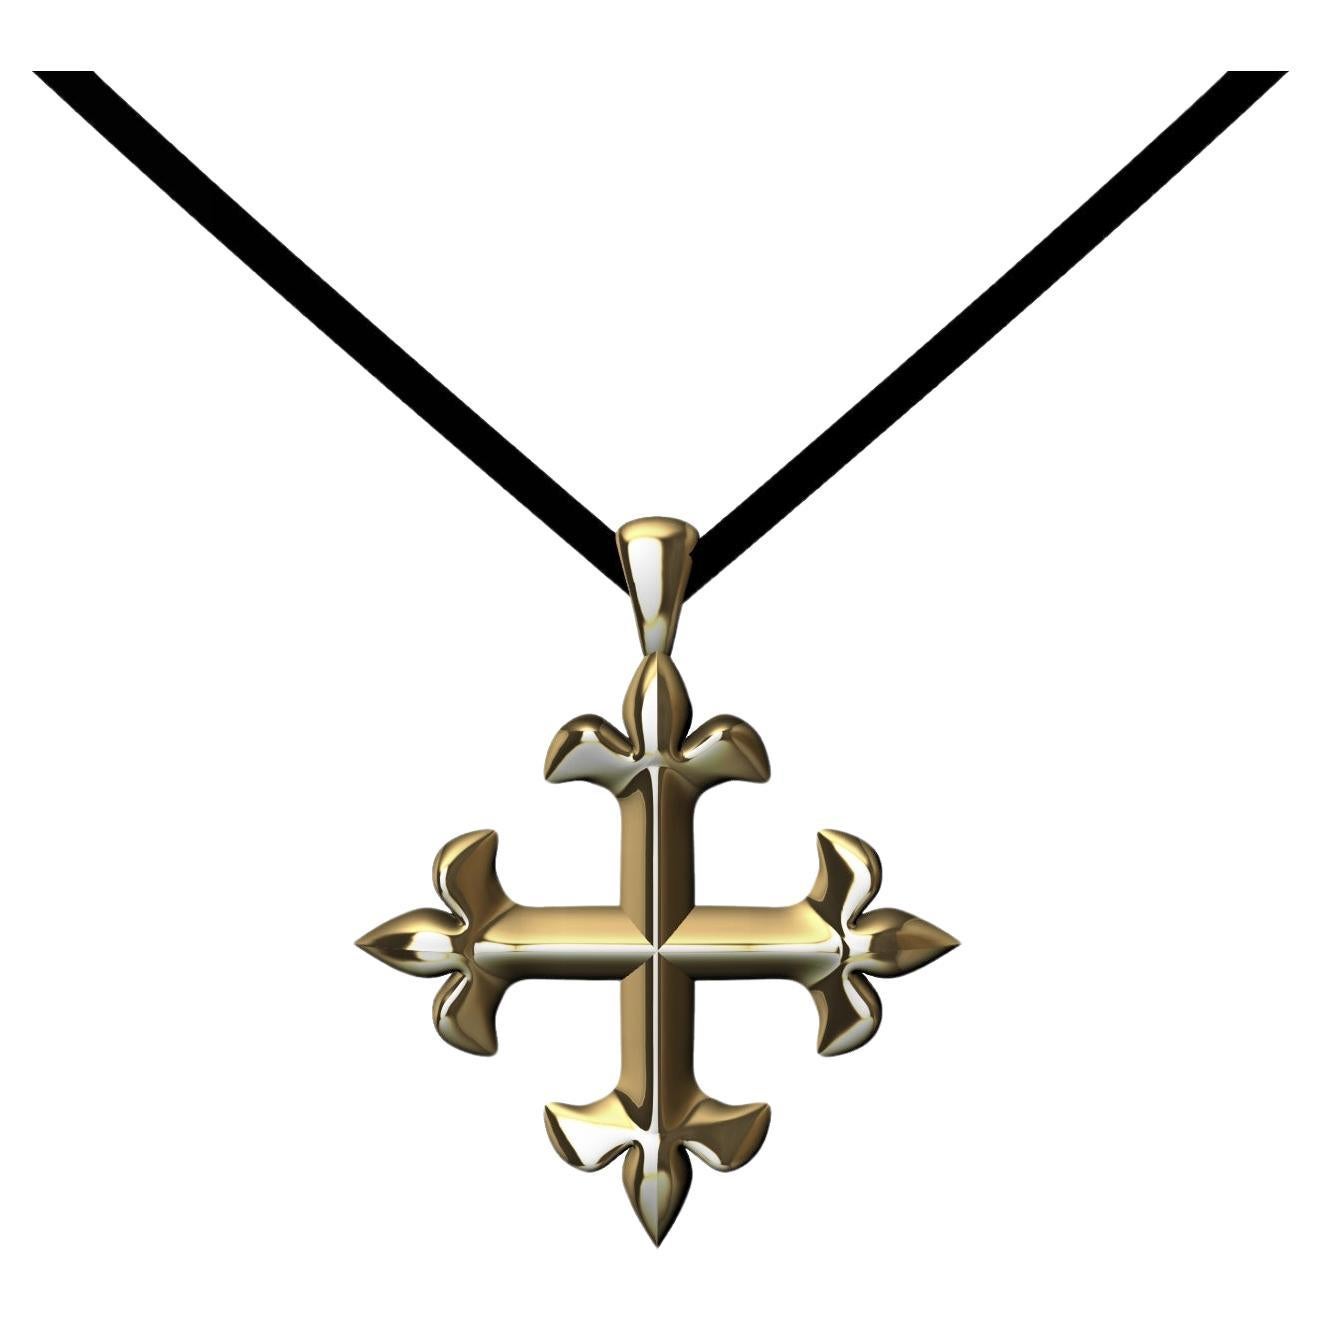 18 Karat Yellow Gold St. Mary's Fleur Di Lys Pendant Necklace, From their stained glass window. This beautiful cross became this free hanging pendant. Matte finished. This is cross a new size, 1 inch x 1 inch or 25.4mm x 25.4mm on a 32 inch ultra